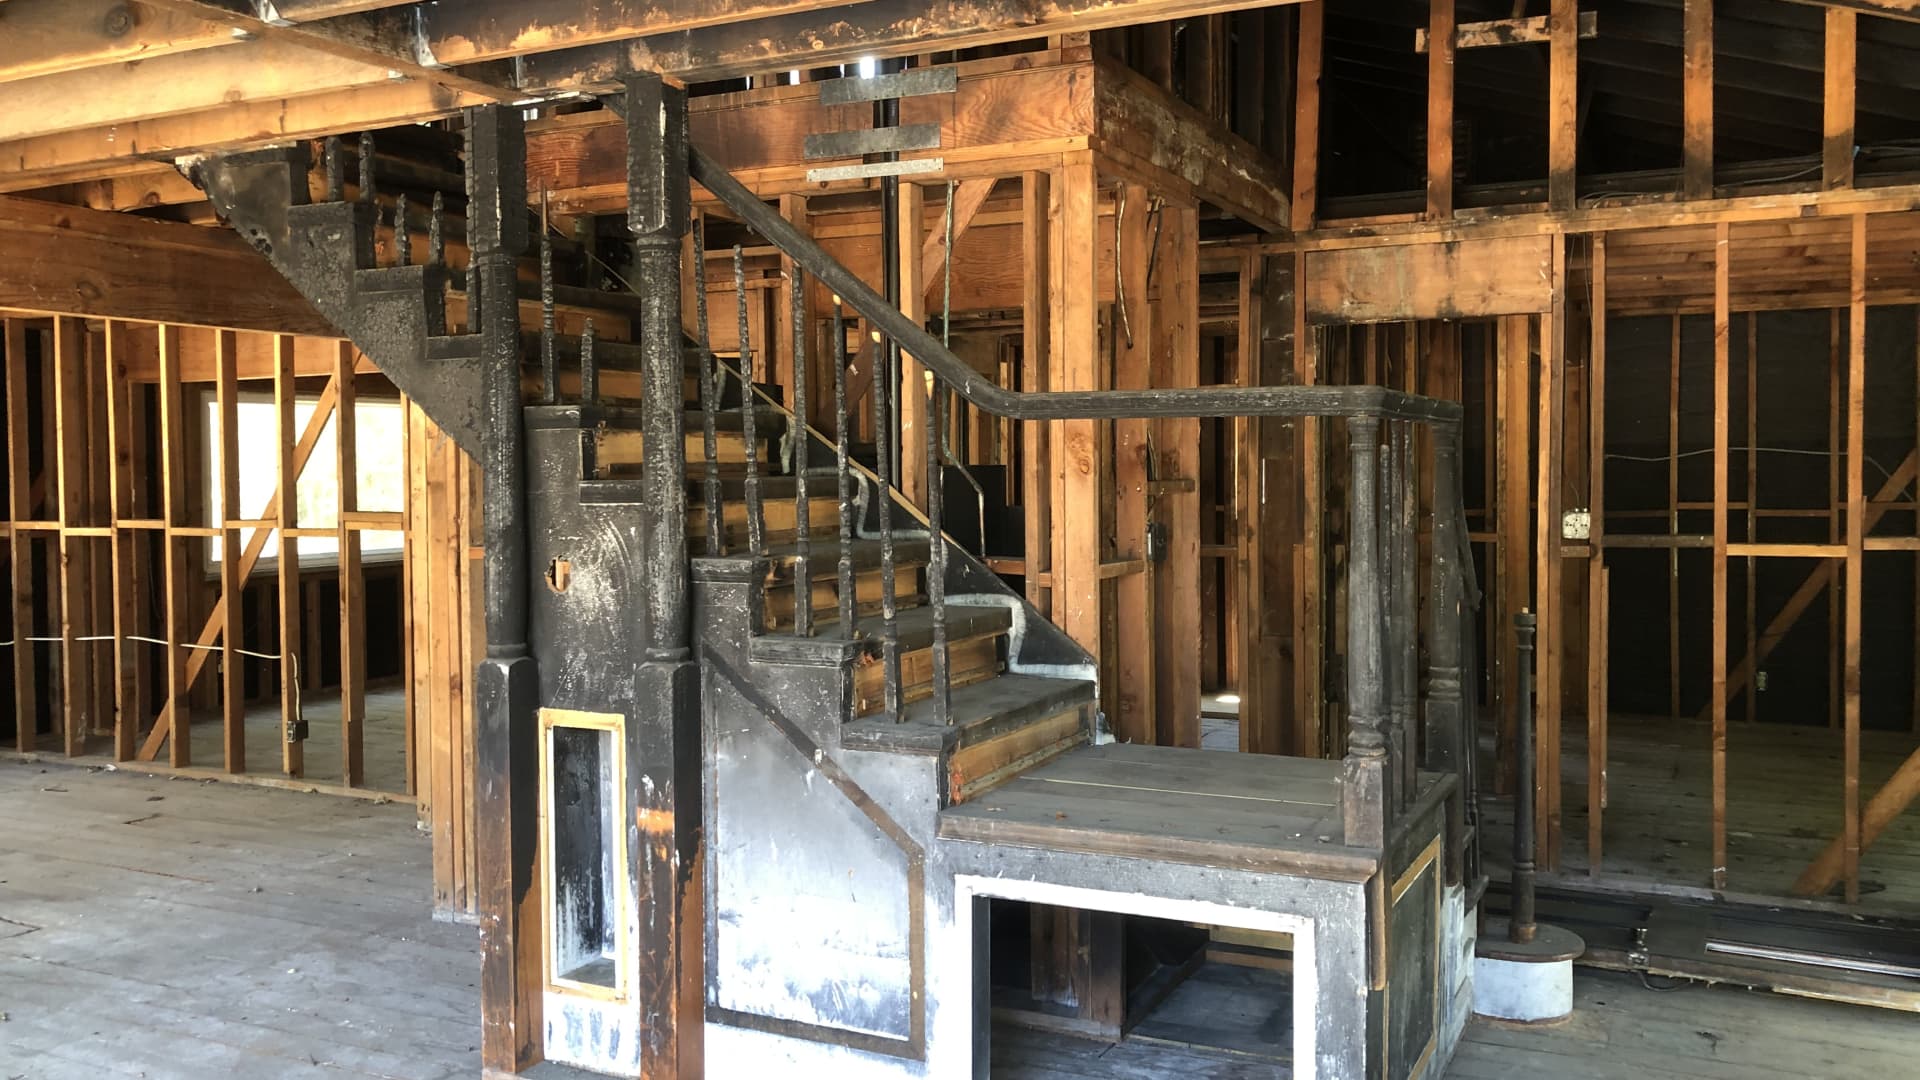 A fire-damaged home in Walnut Creek, California has sold within days after bidding war.